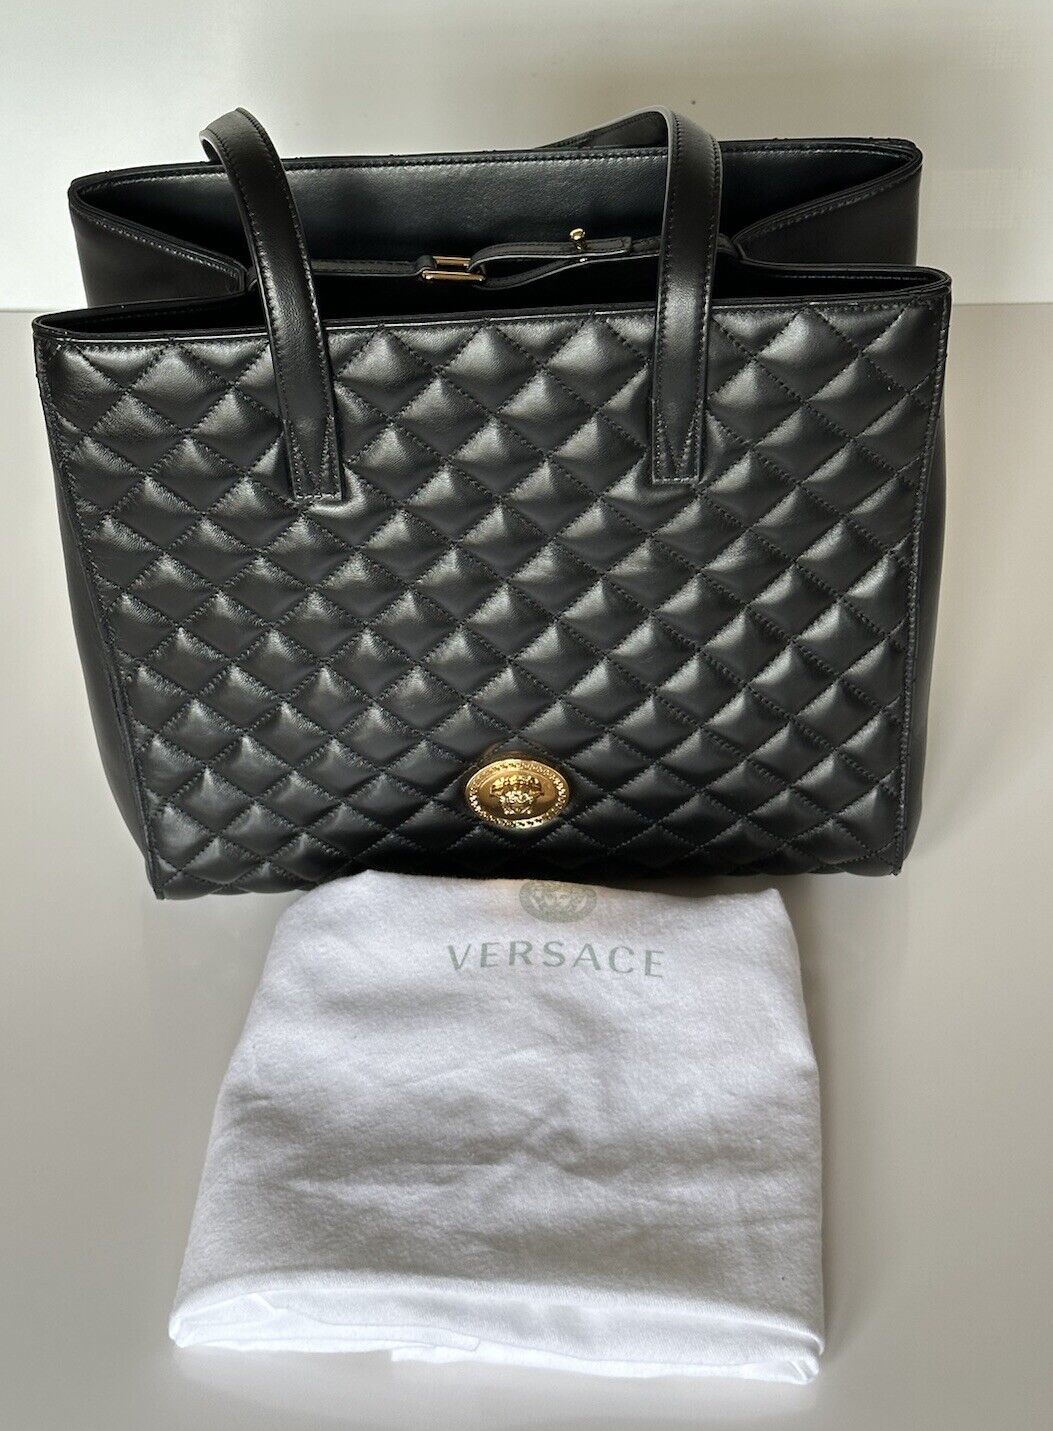 Versace Medusa Quilted Lamb Leather Black Tote Bag 1013789 Italy NWT $1700